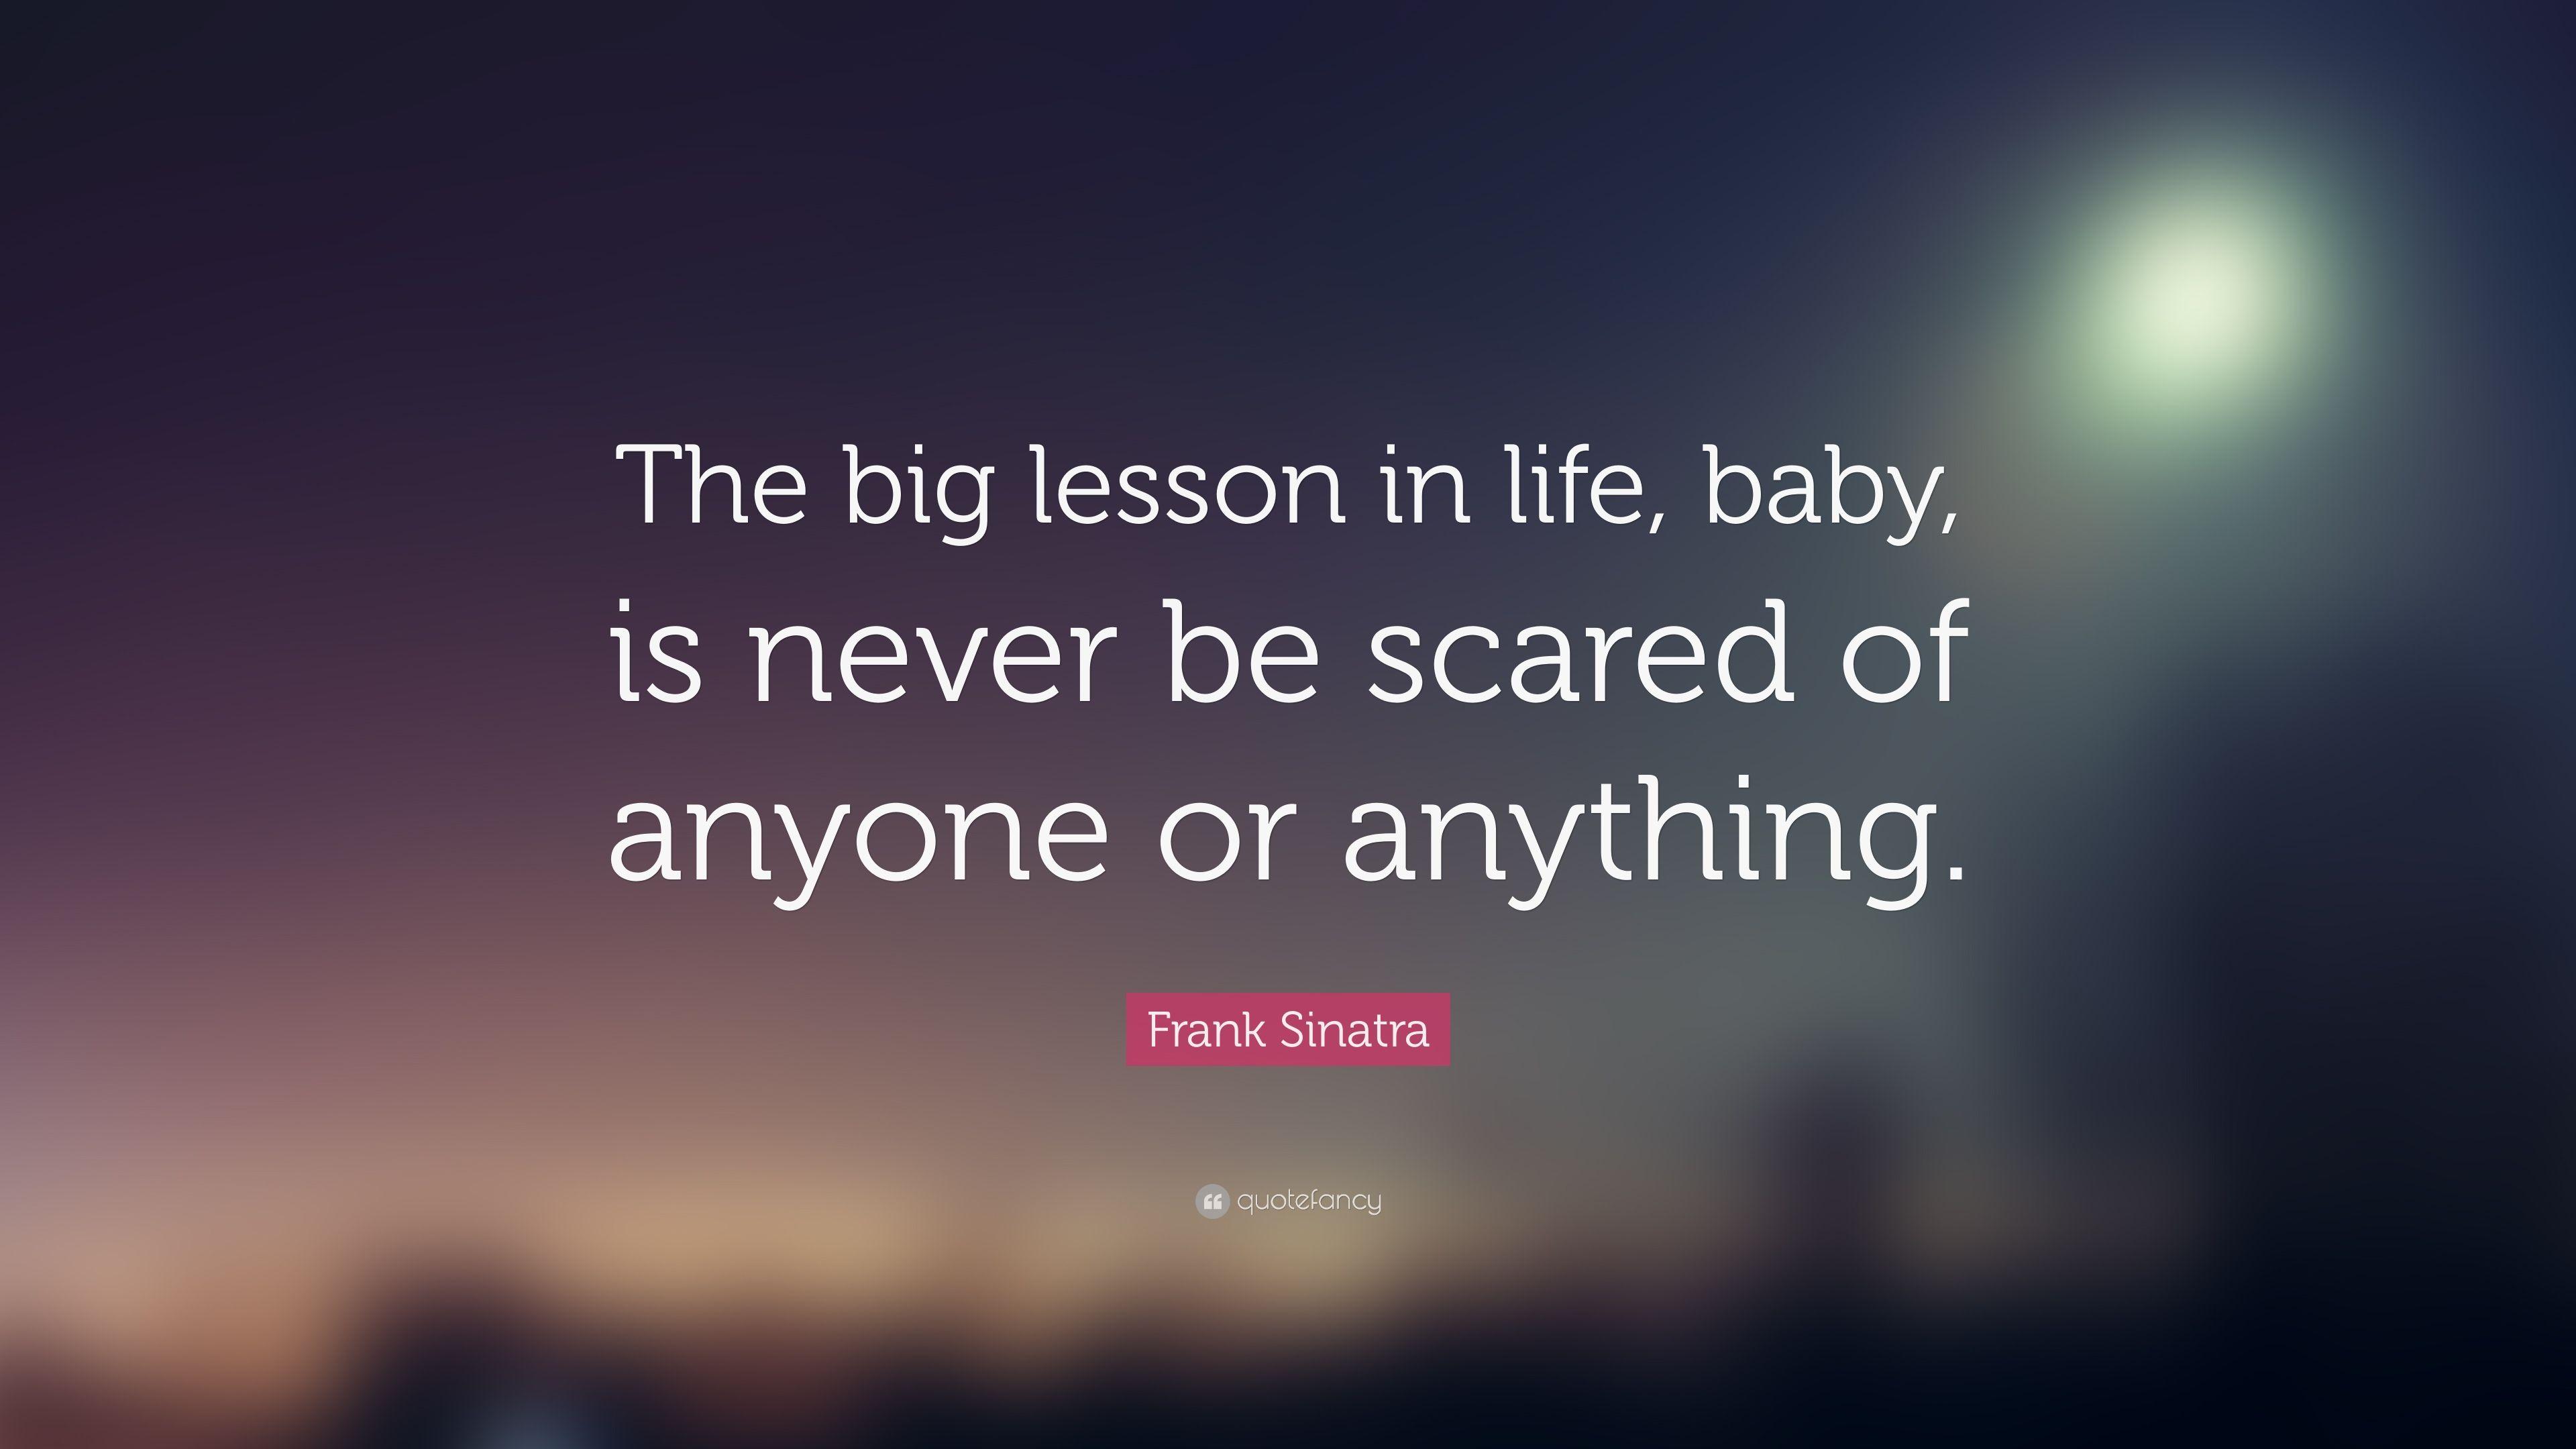 Frank Sinatra Quote: “The big lesson in life, baby, is never be